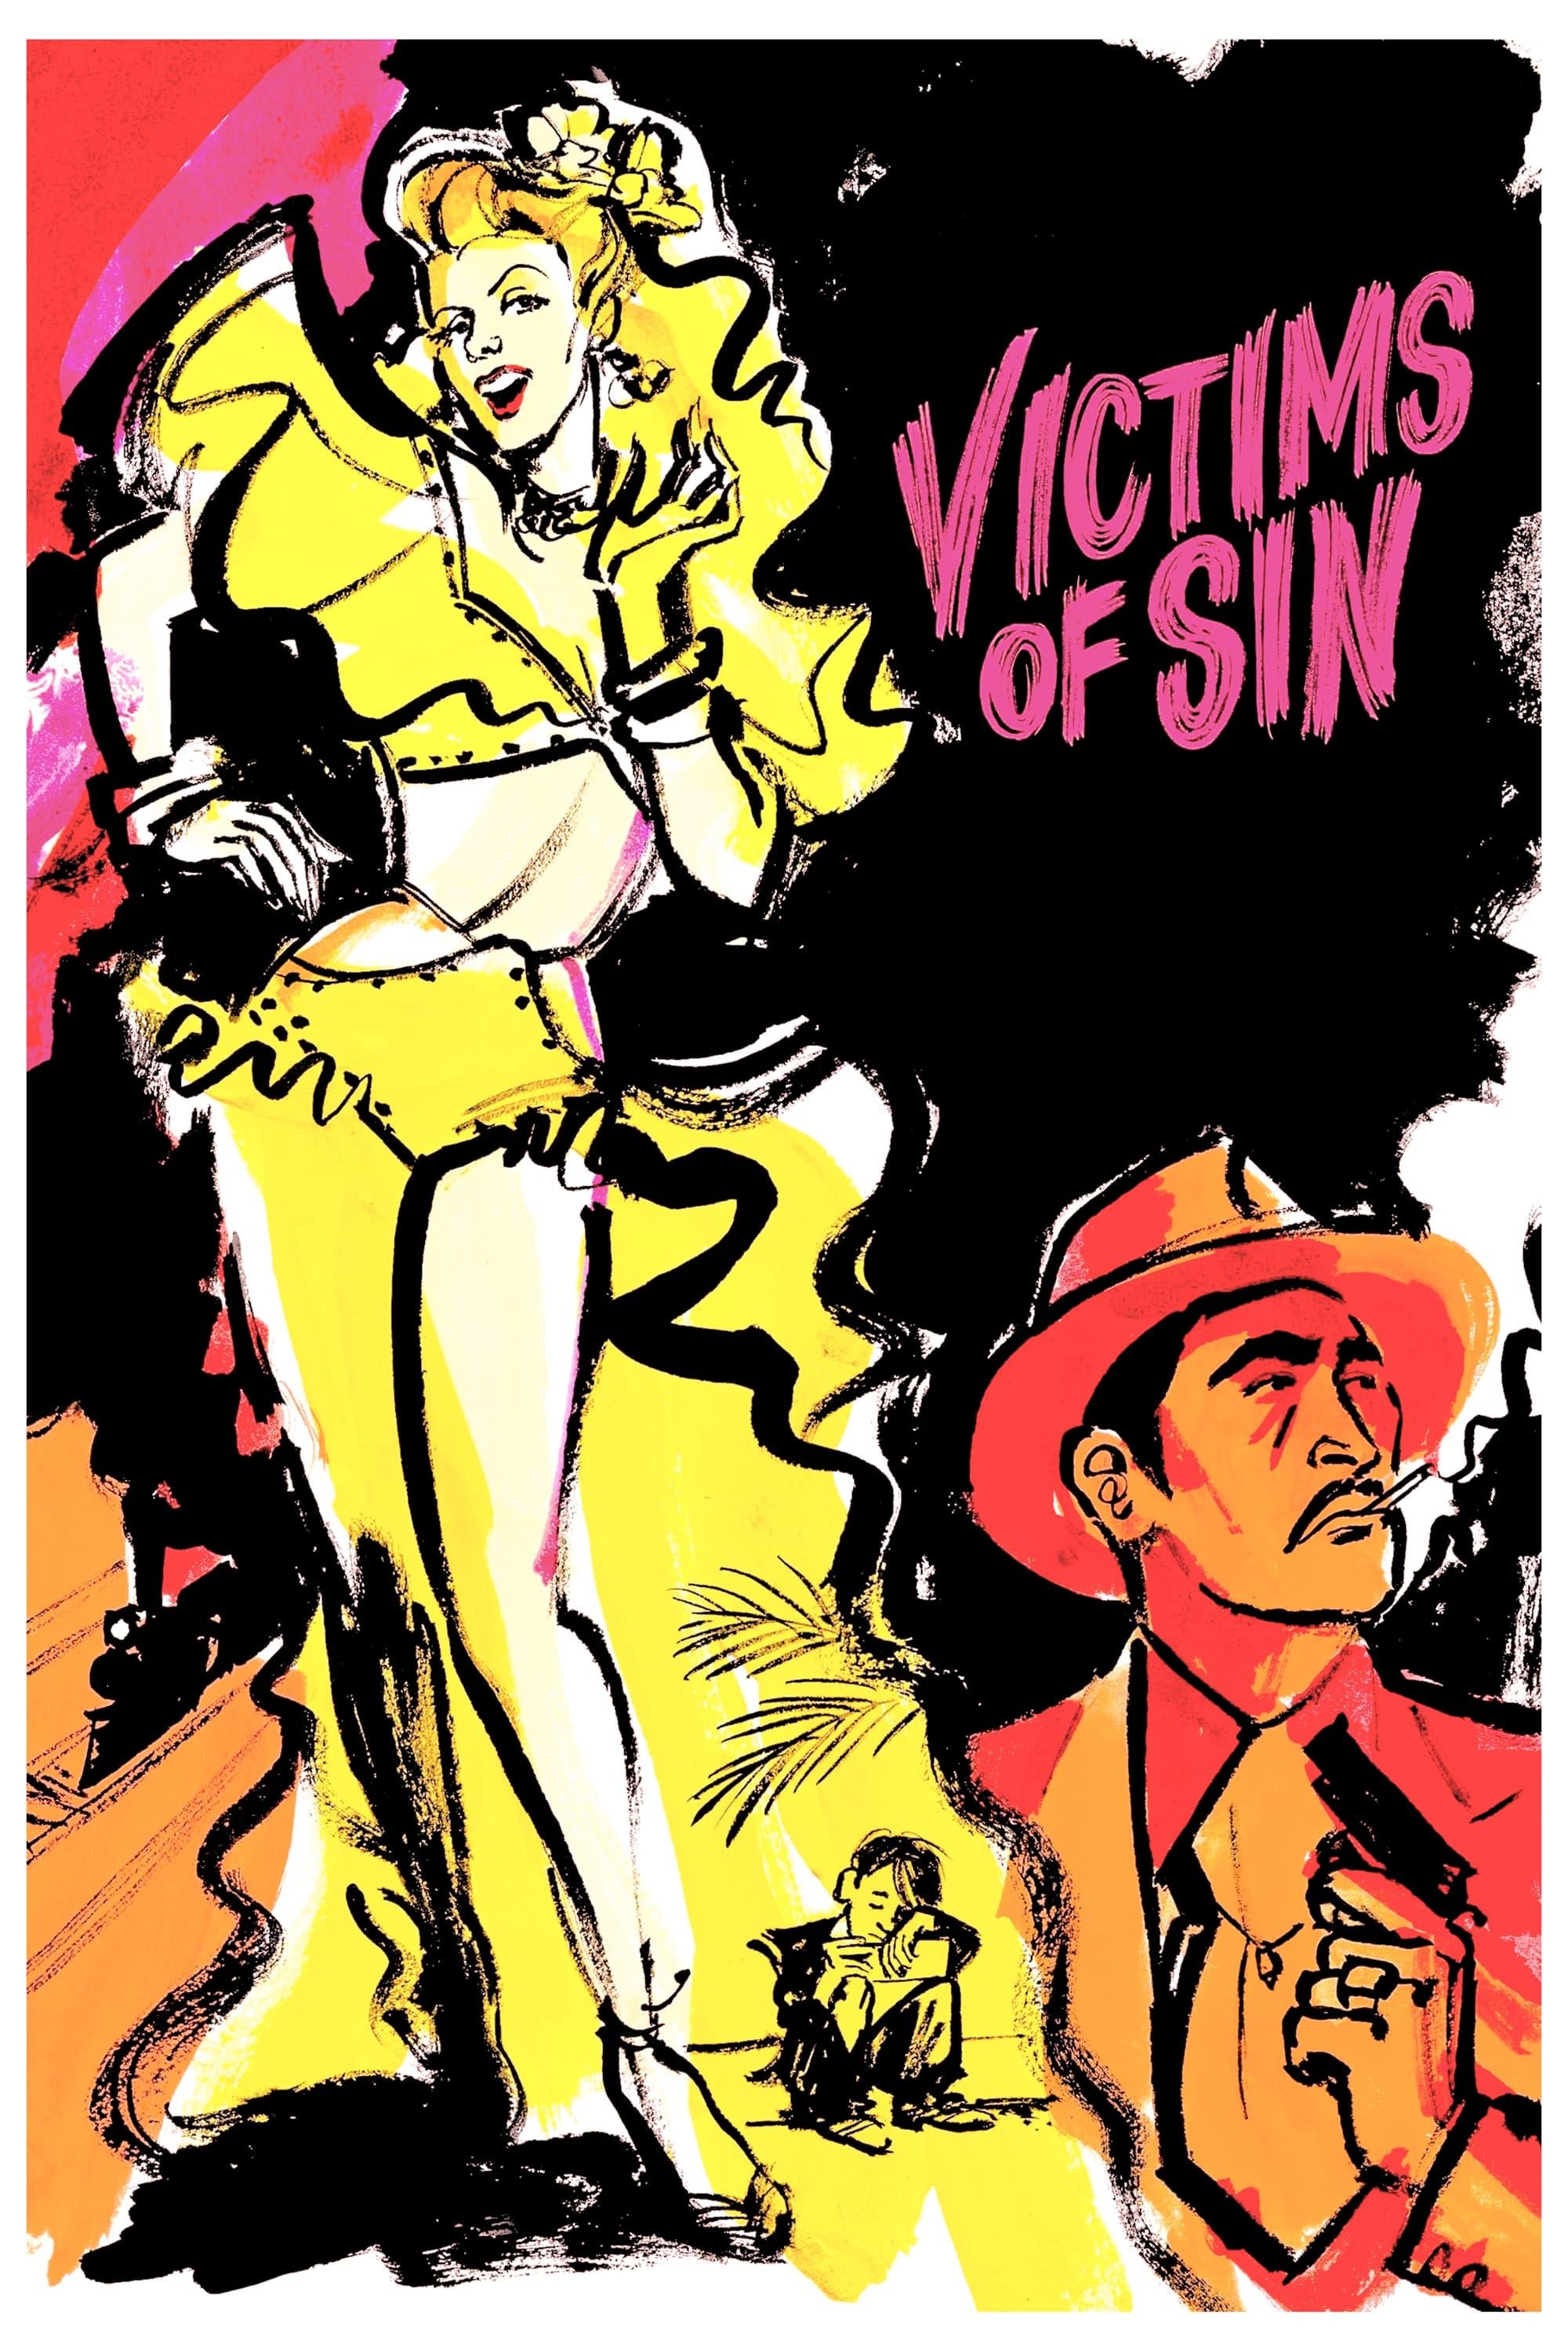 Victims of Sin poster